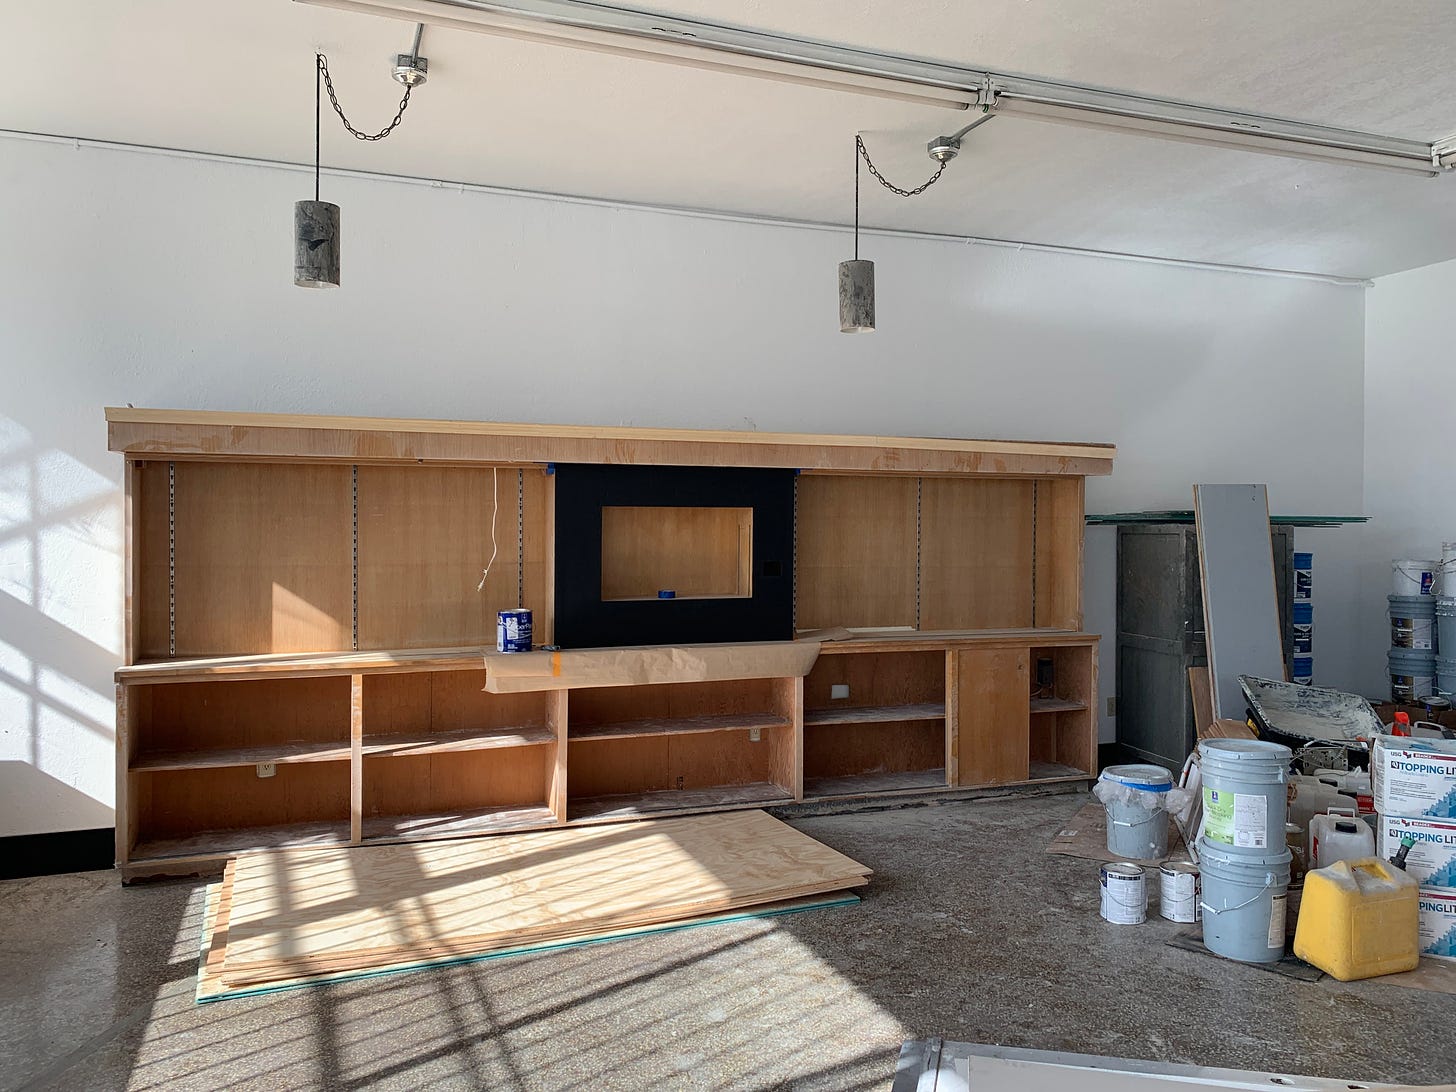 sun filled vacant retail space with construction materials strewn about